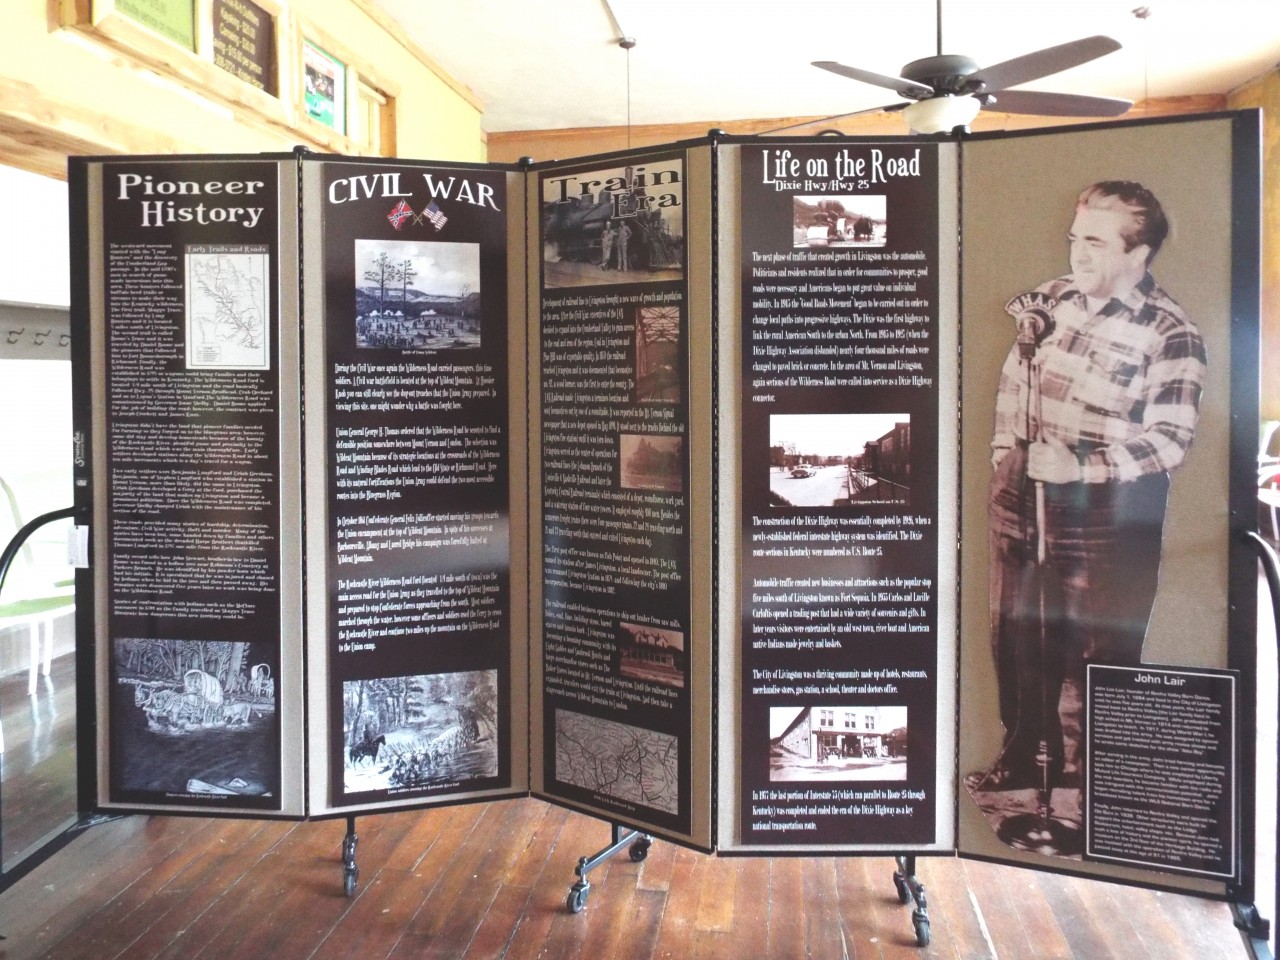 Historical museum display information hung on a 5 panel room divider